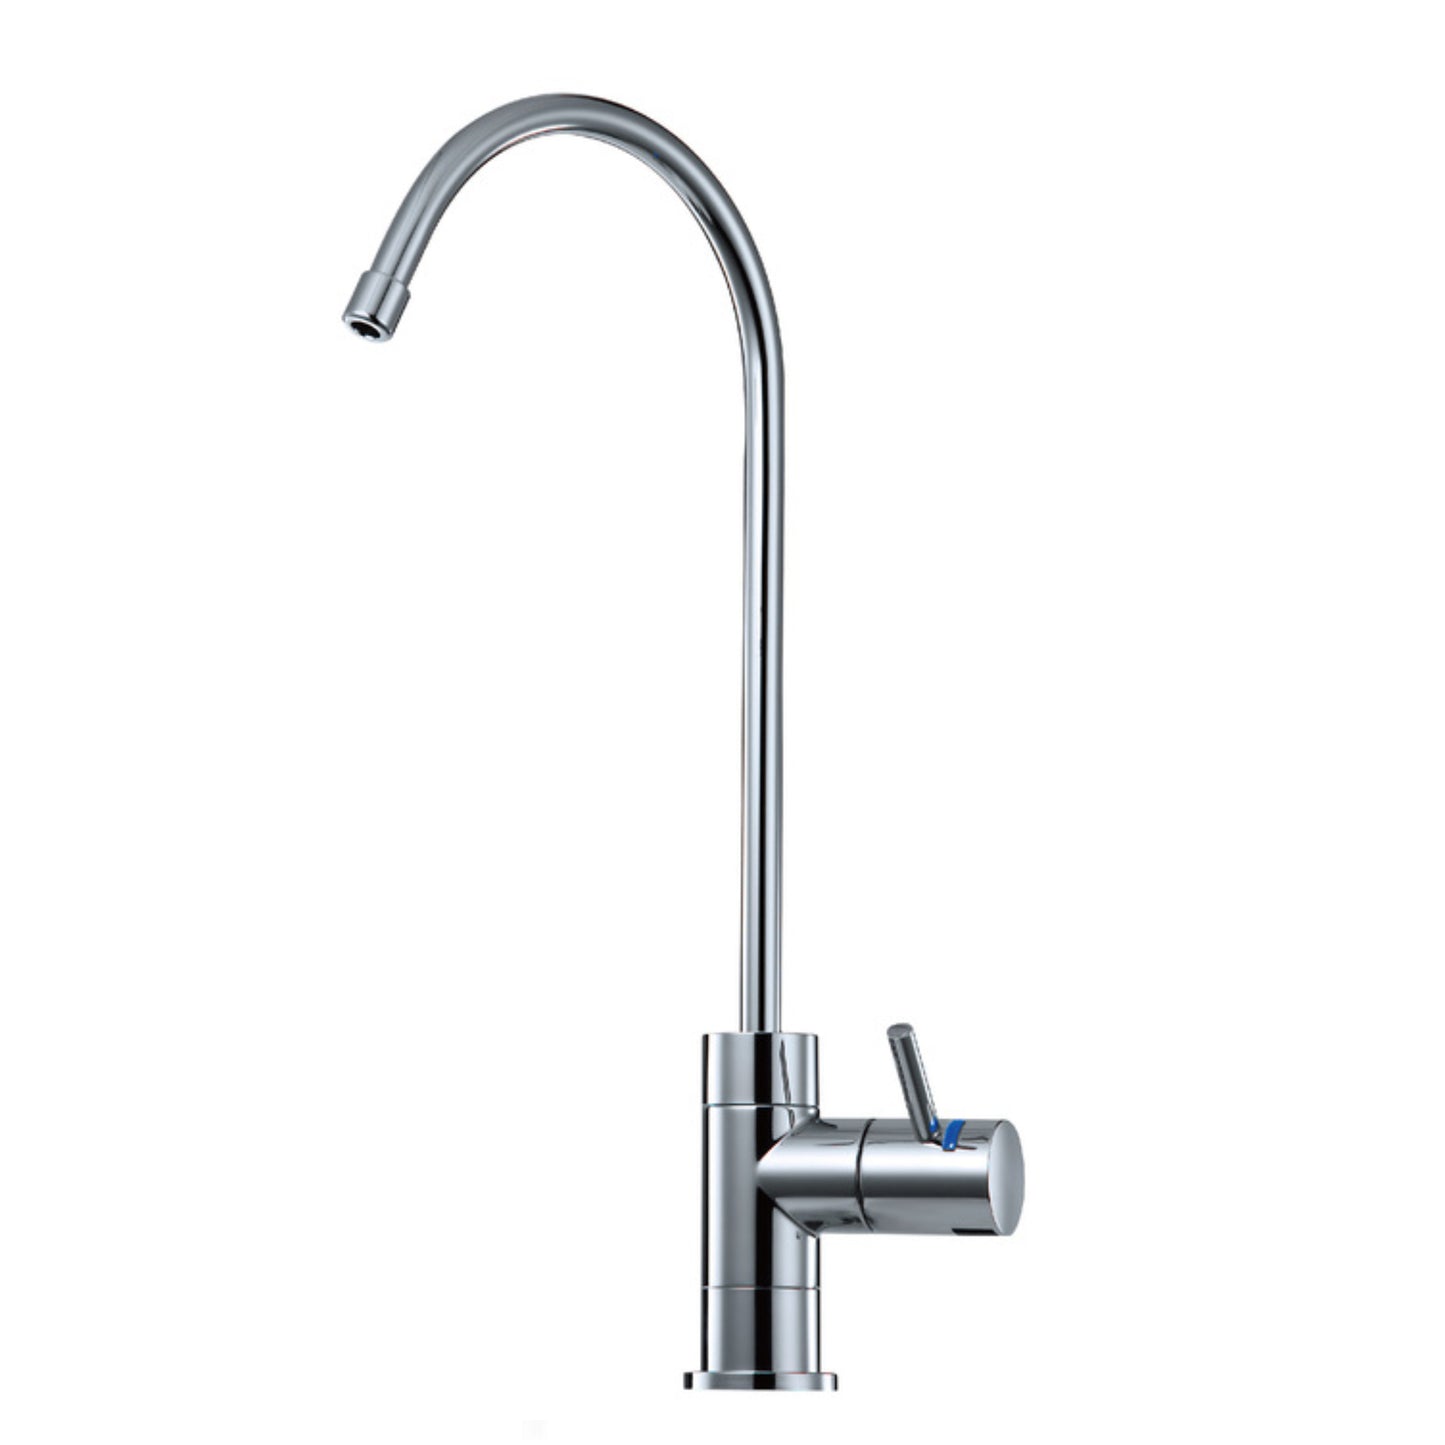 AquaCo Chrome Water Filter Tap with LED Indicator - Model: TAP-HL-CH